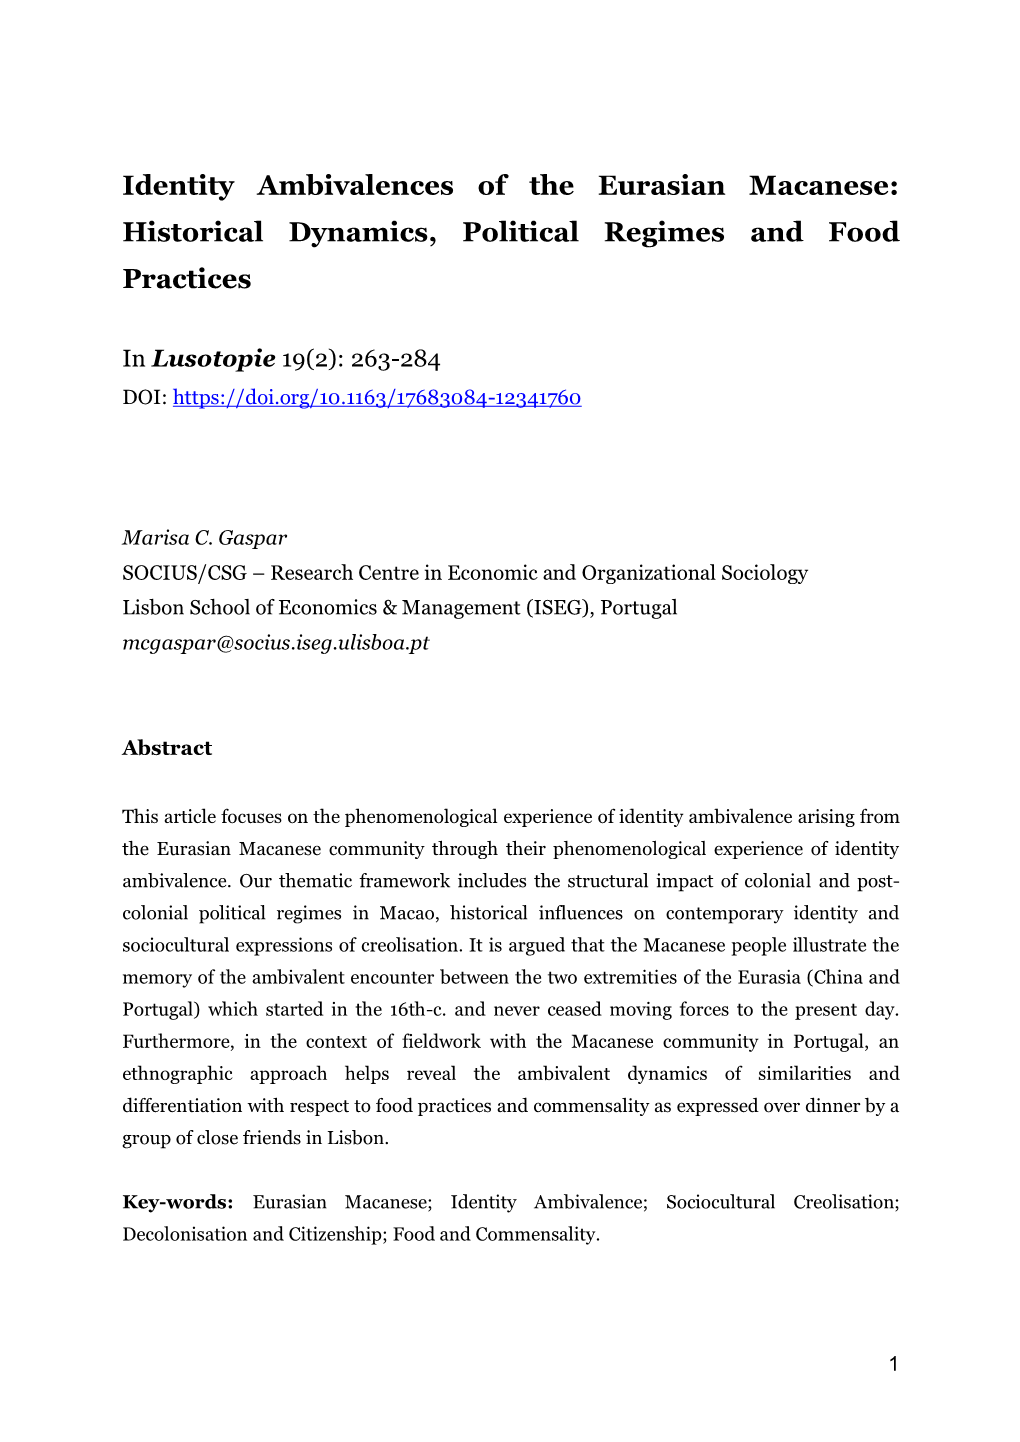 Identity Ambivalences of the Eurasian Macanese: Historical Dynamics, Political Regimes and Food Practices